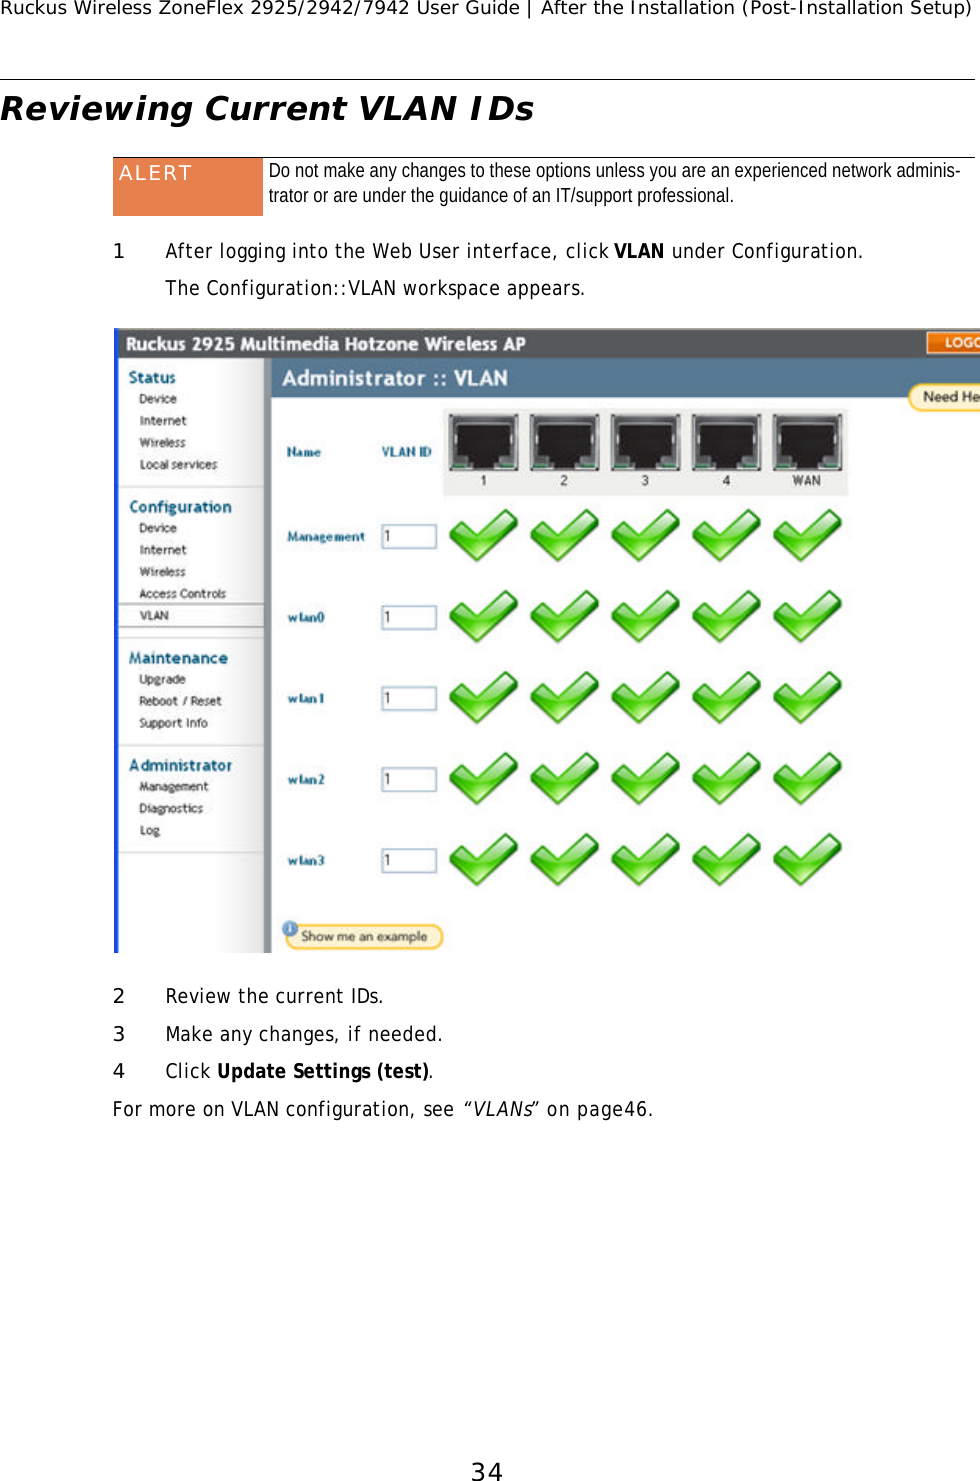 Ruckus Wireless ZoneFlex 2925/2942/7942 User Guide | After the Installation (Post-Installation Setup)34Reviewing Current VLAN IDs 1After logging into the Web User interface, click VLAN under Configuration.The Configuration::VLAN workspace appears. 2Review the current IDs.3Make any changes, if needed.4Click Update Settings (test).For more on VLAN configuration, see “VLANs” on page46.ALERT Do not make any changes to these options unless you are an experienced network adminis-trator or are under the guidance of an IT/support professional.FIGURE 3-1